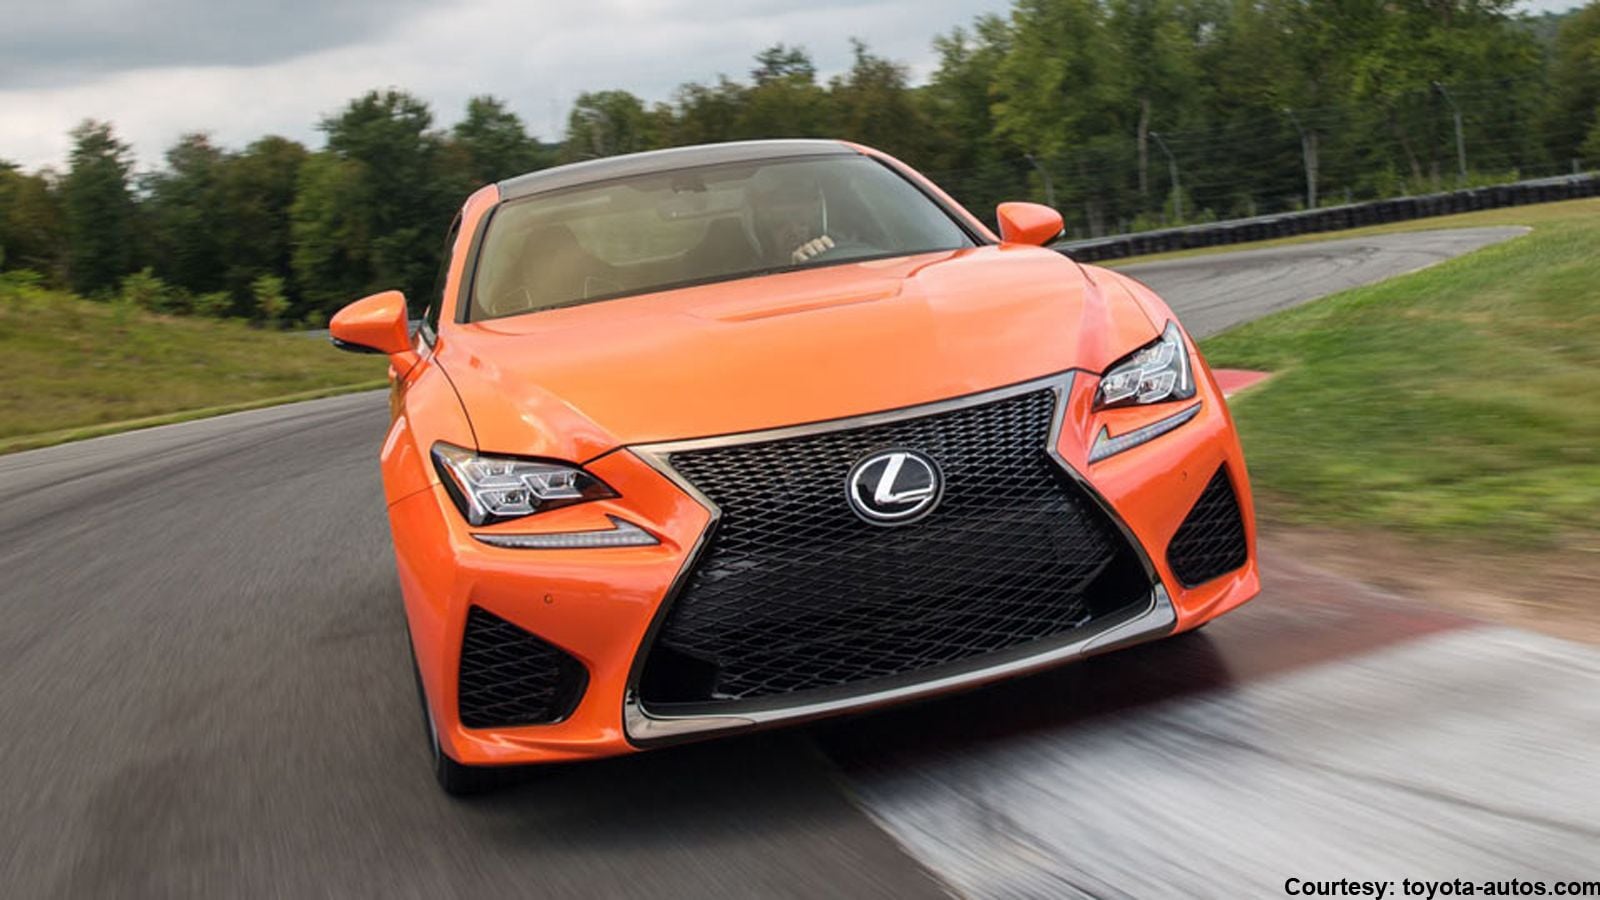 5 Cool Facts About the Lexus Driving School Clublexus